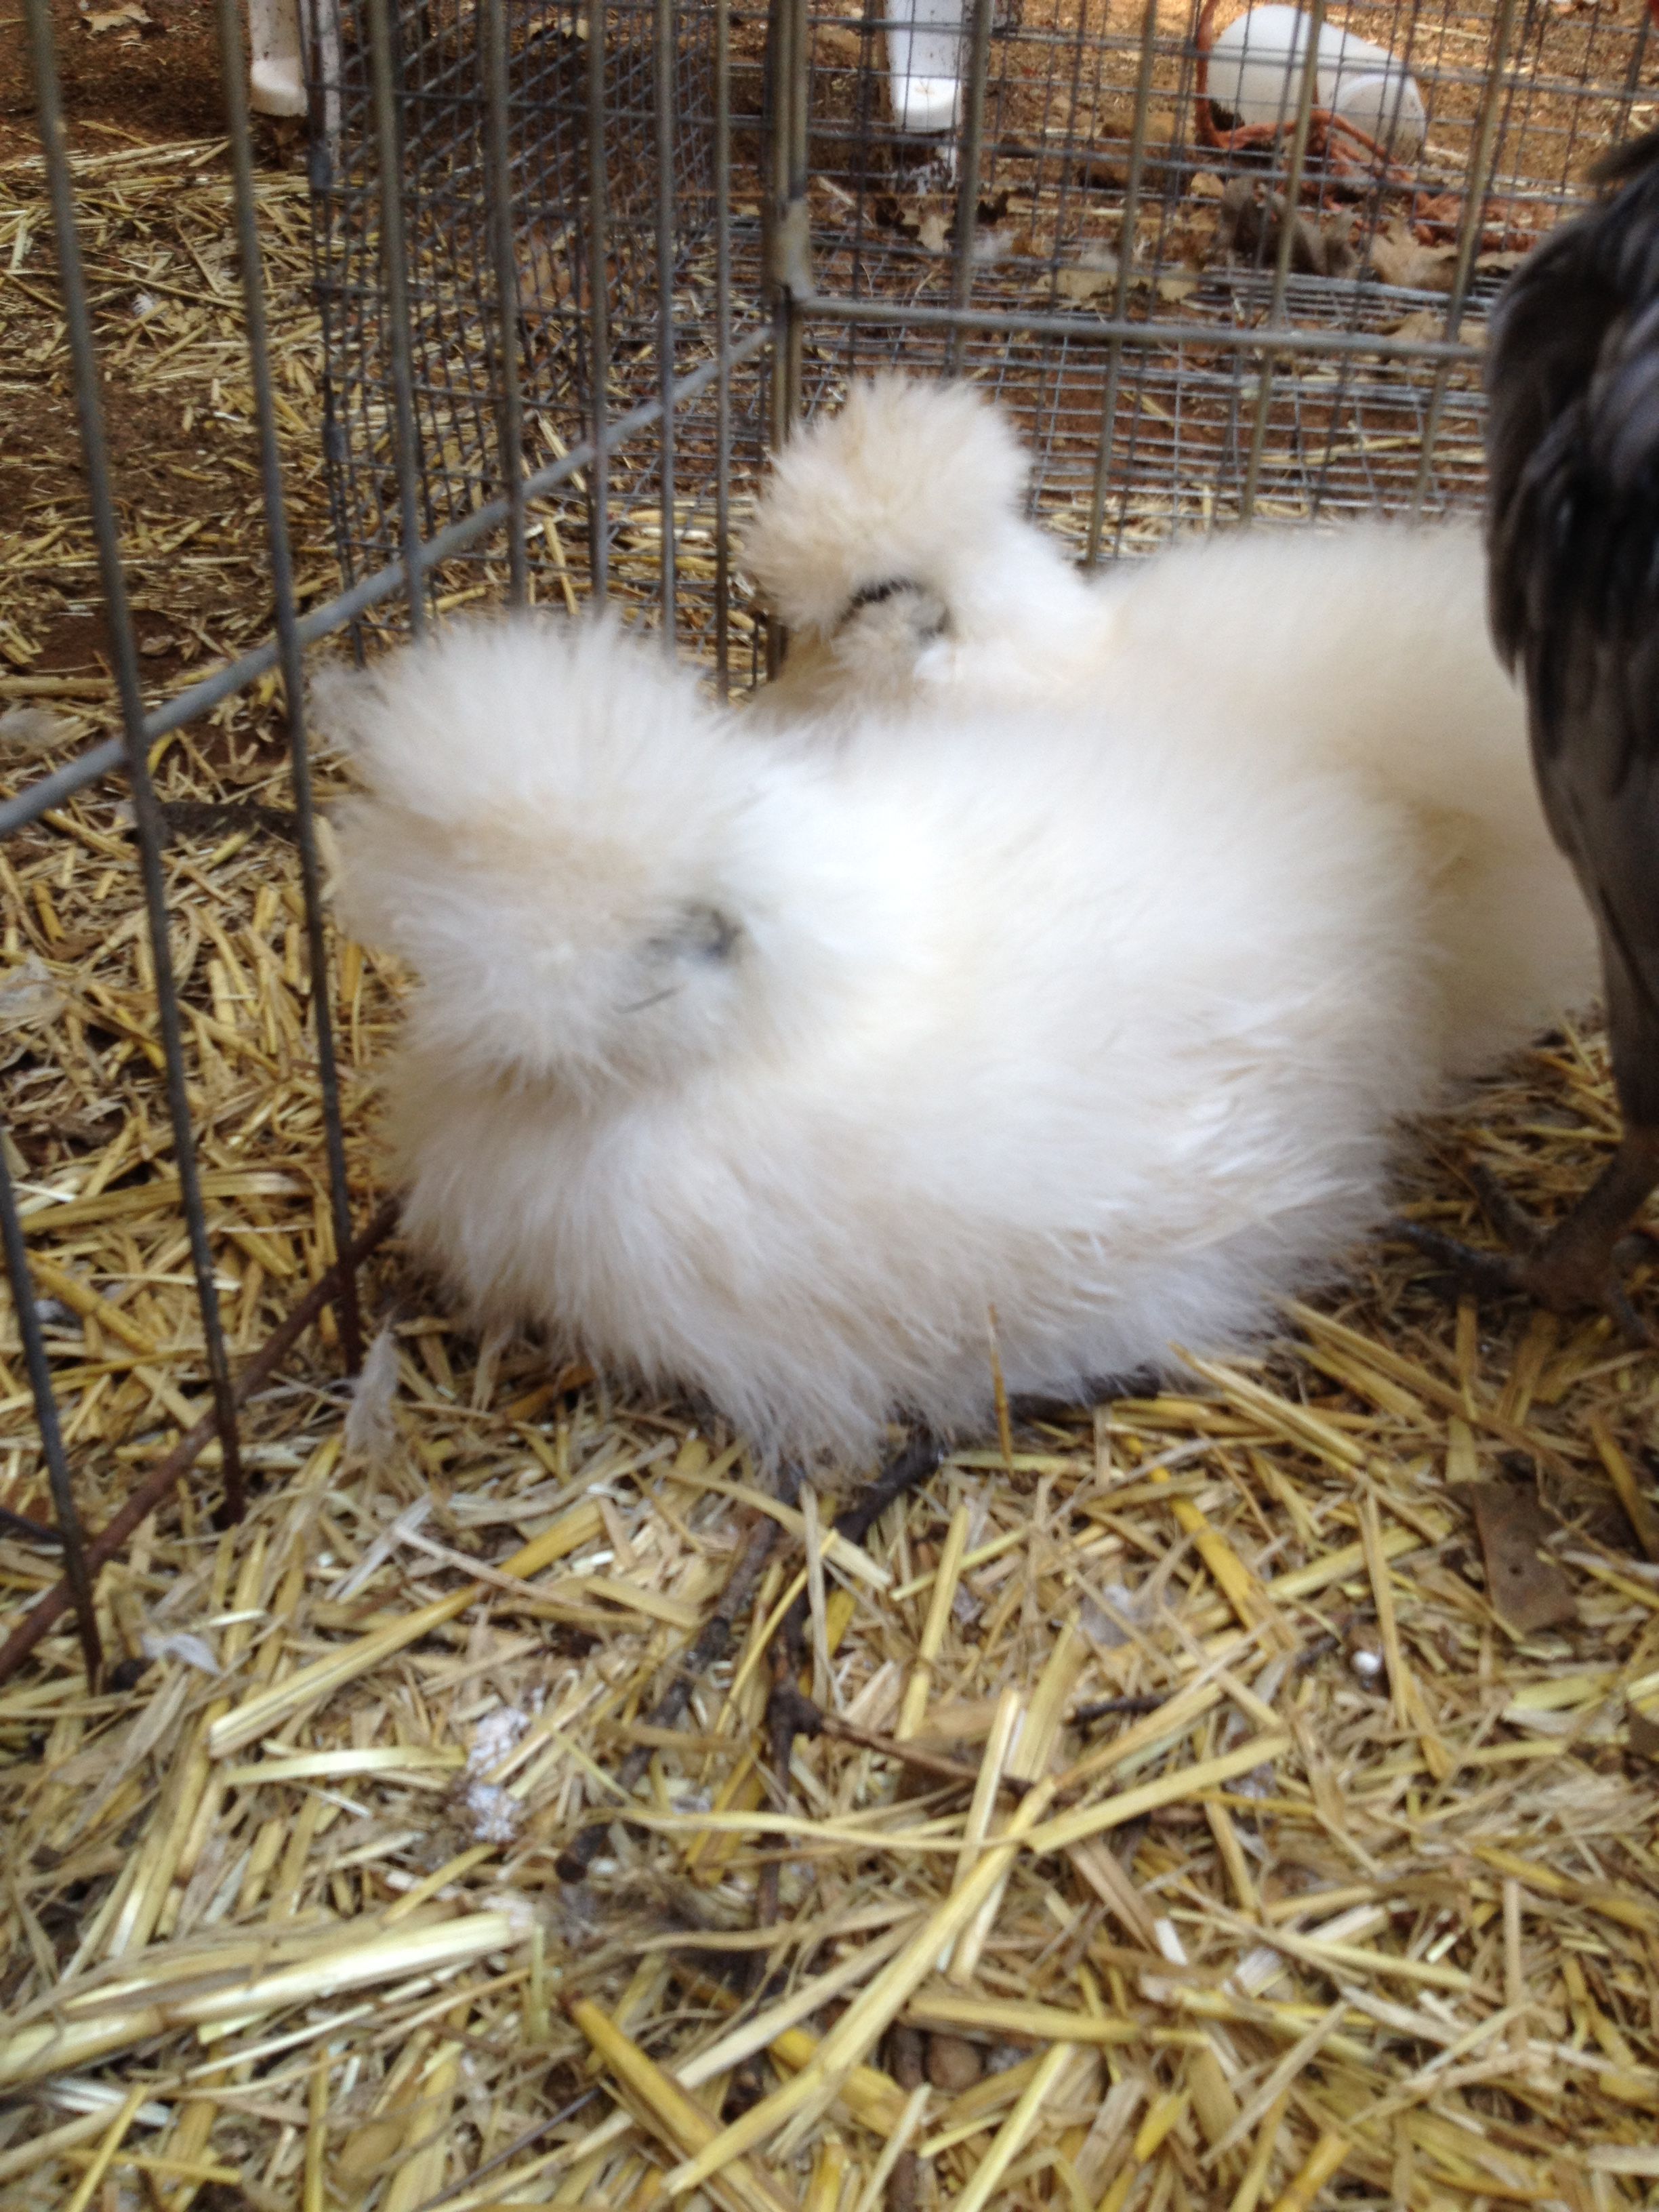 White Silkie 1 (foreground) and White Silkie 2 (background)